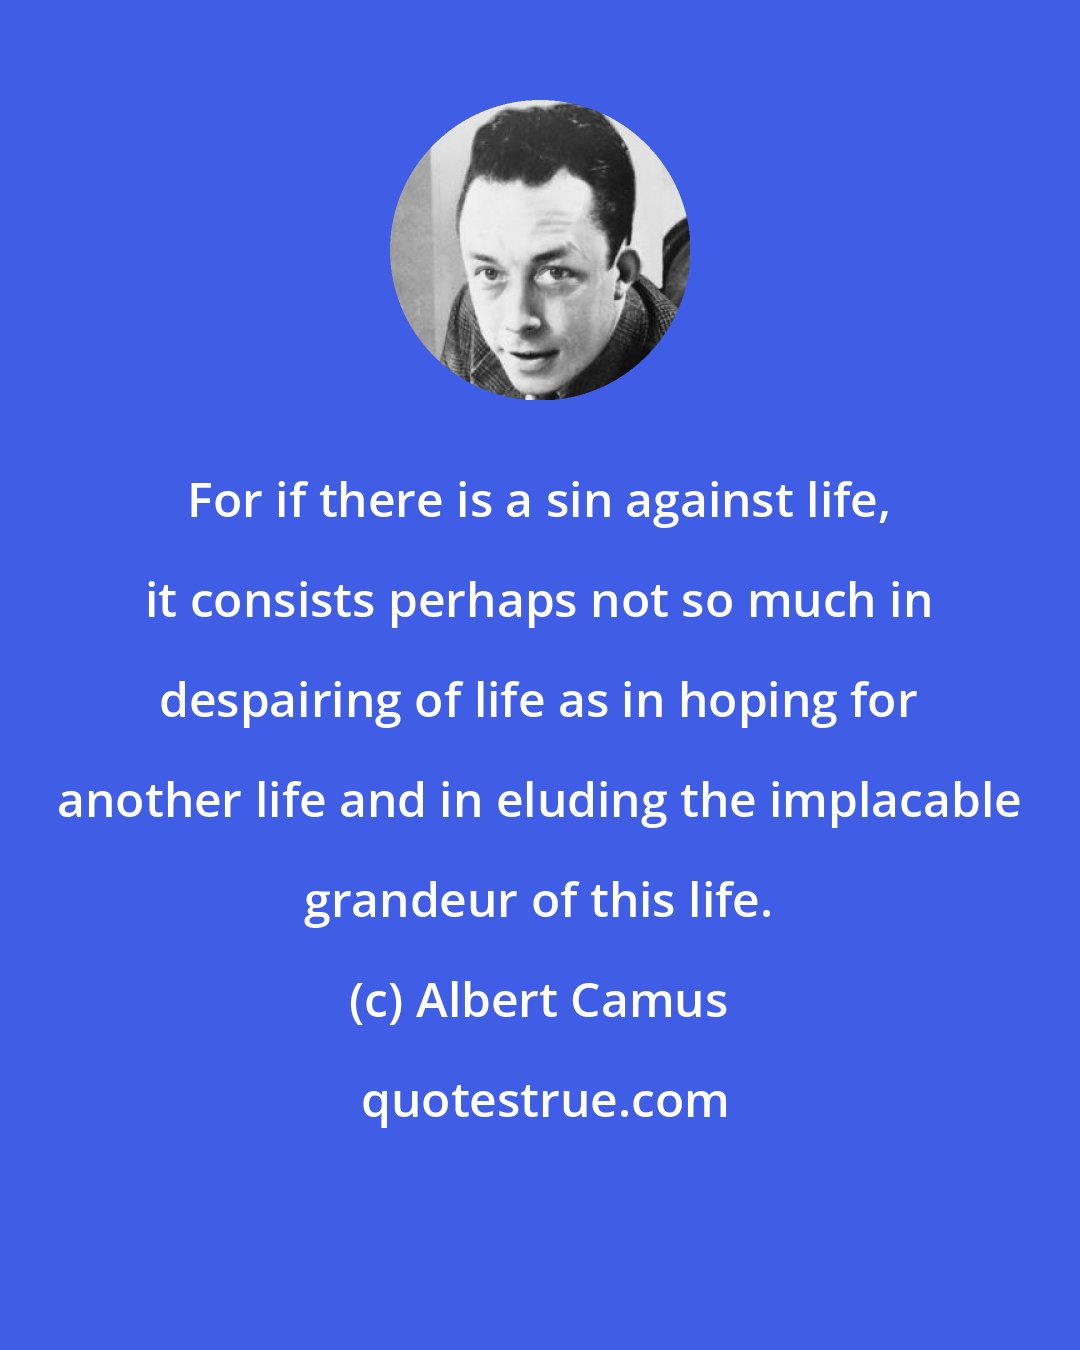 Albert Camus: For if there is a sin against life, it consists perhaps not so much in despairing of life as in hoping for another life and in eluding the implacable grandeur of this life.